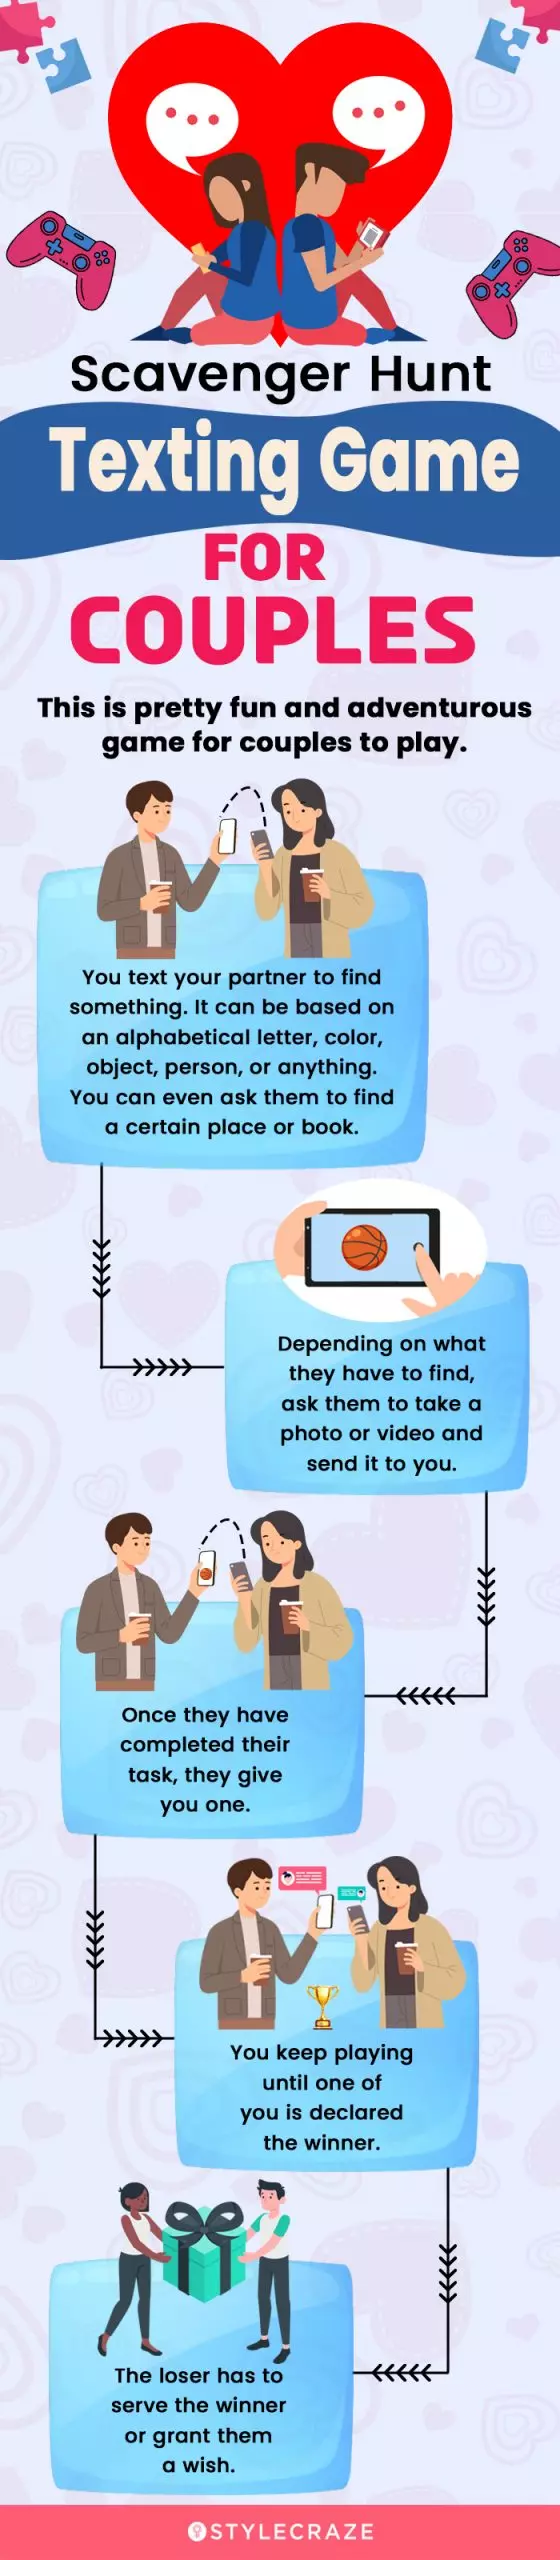 scavenger hunt texting game for couples (infographic)